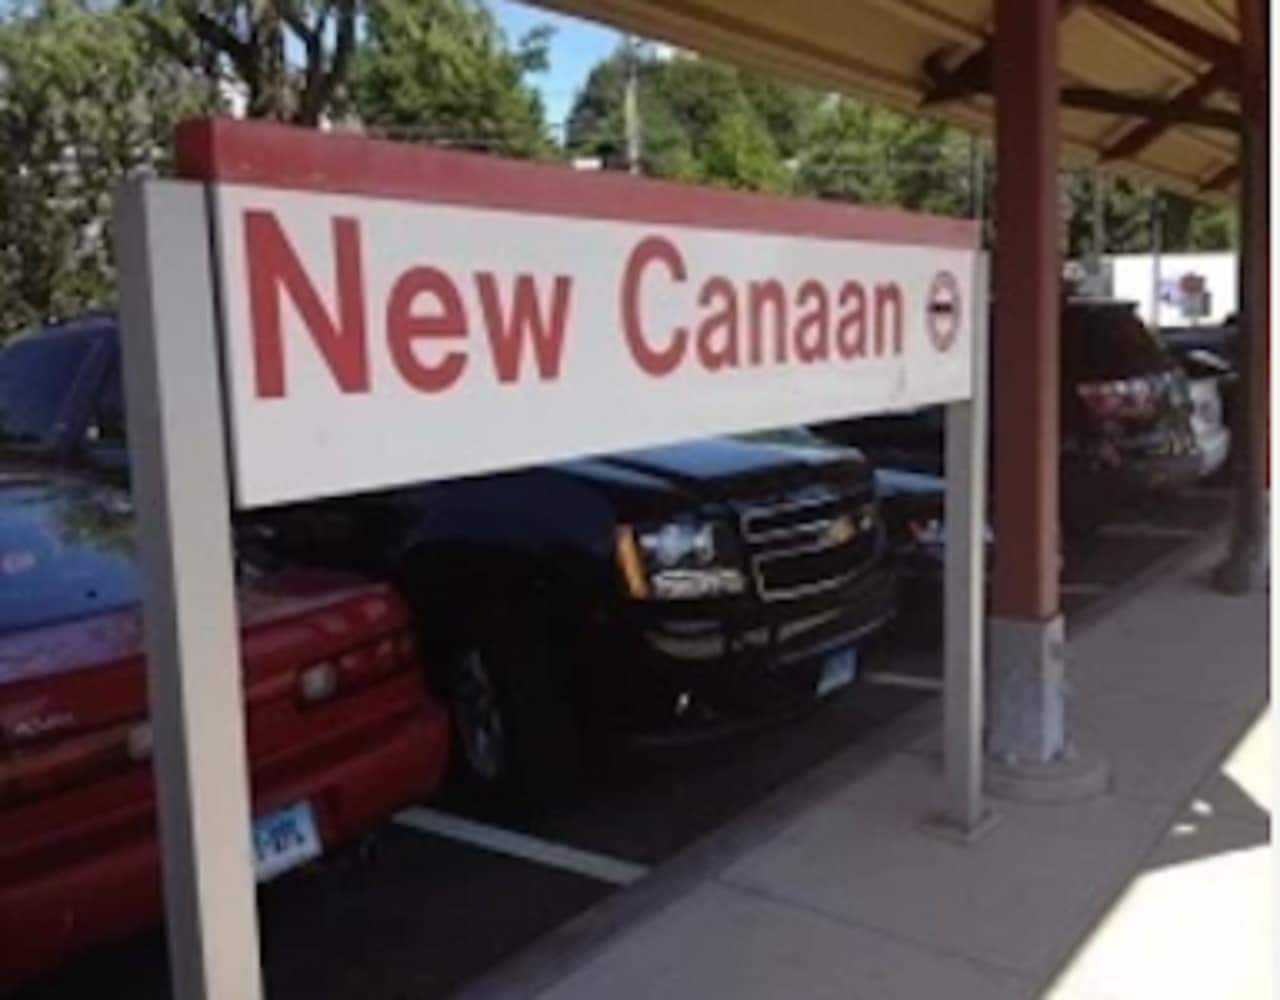 Buses will be running this weekend from the New Canaan train station.